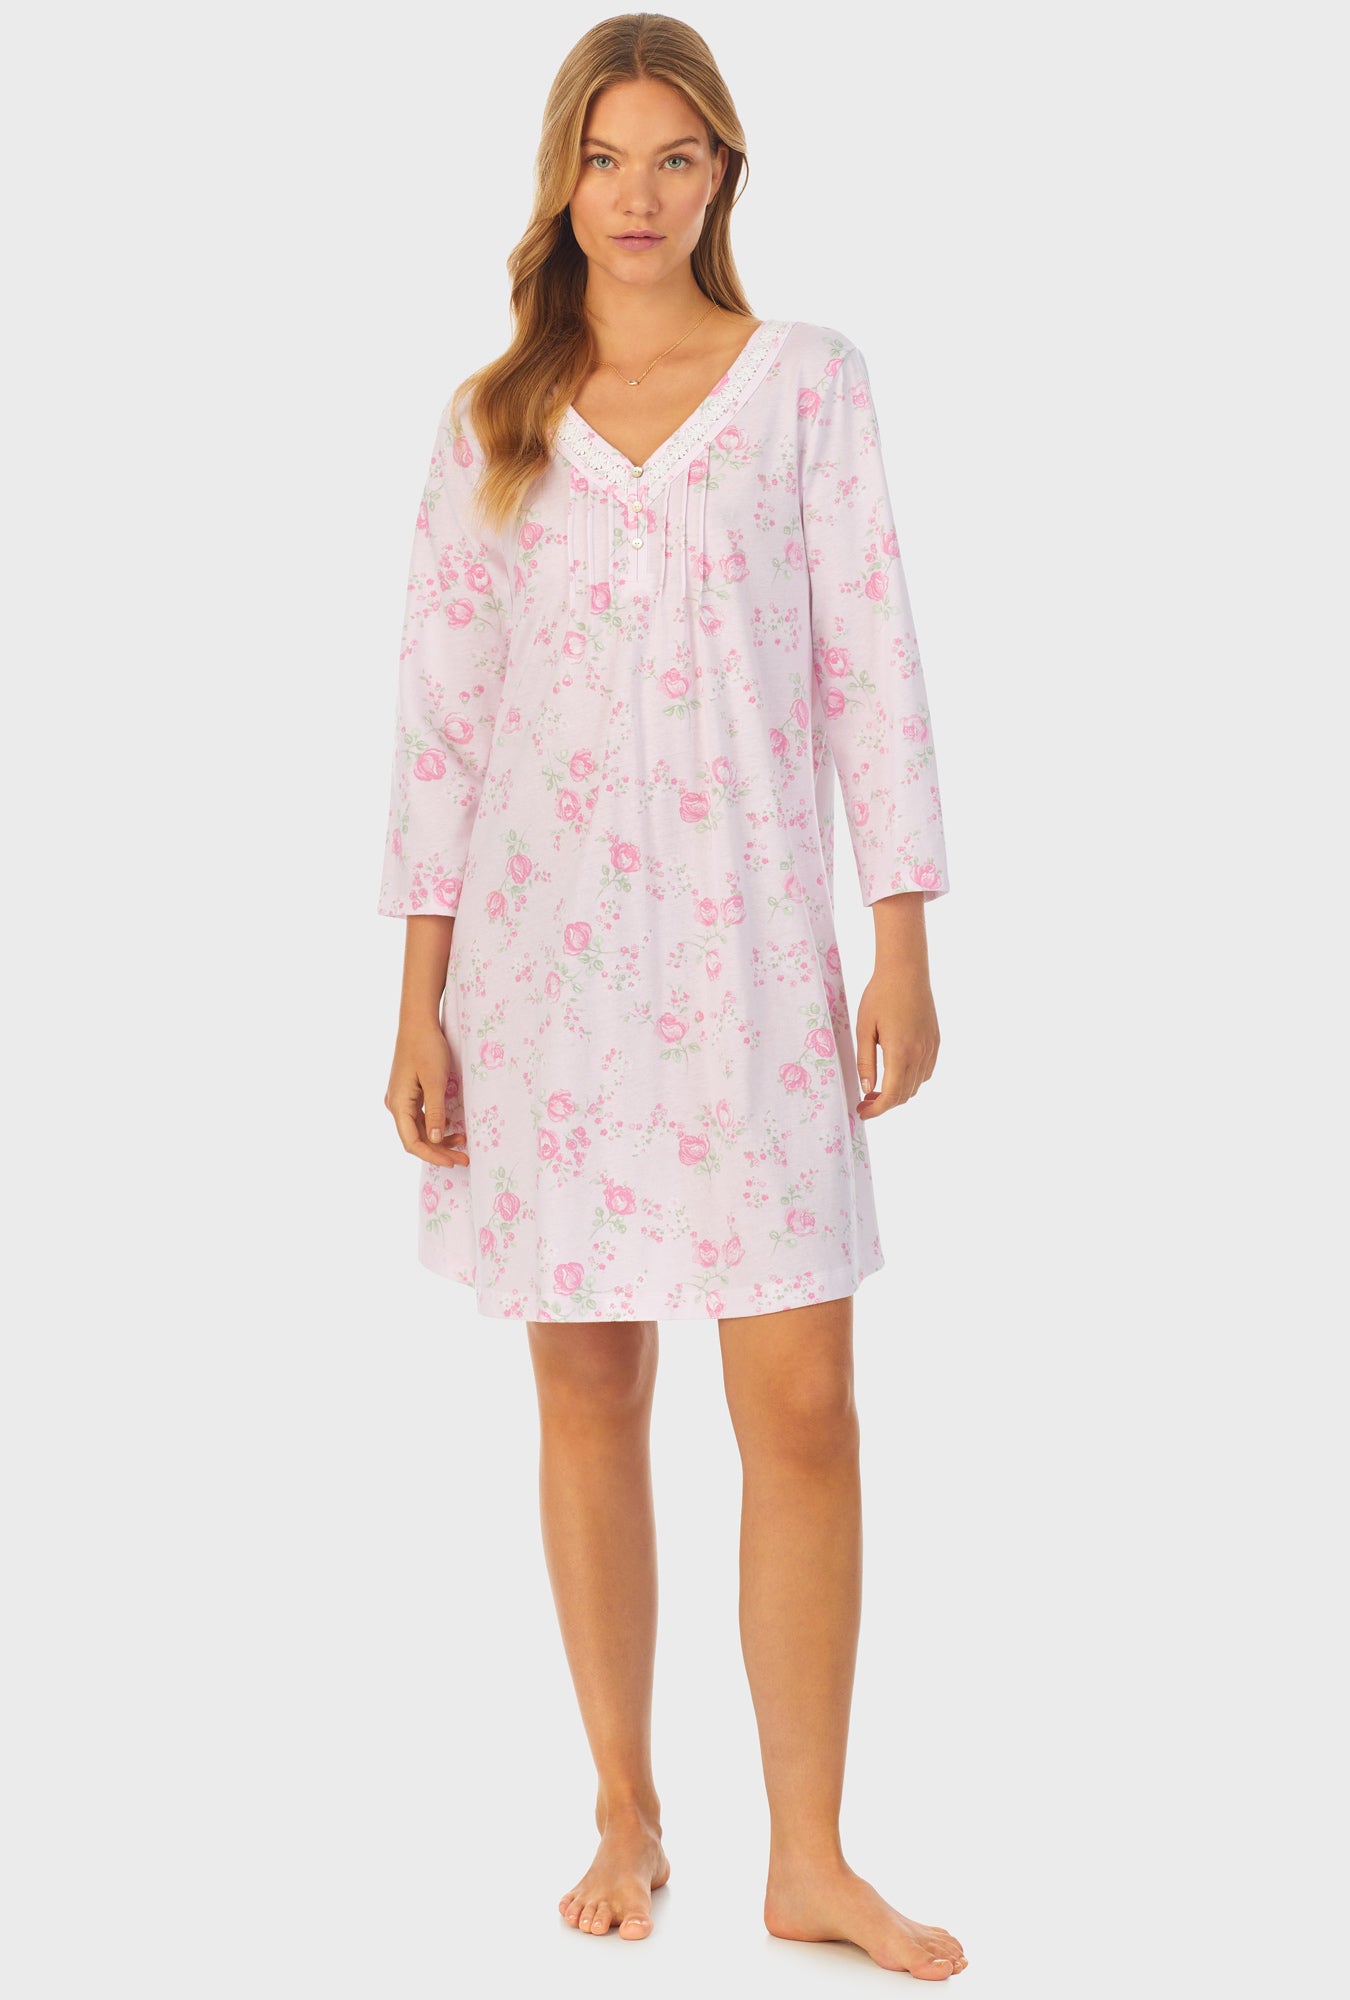 A lady wearing pink quarter sleeve cotton short nightgown with sweet rose print.